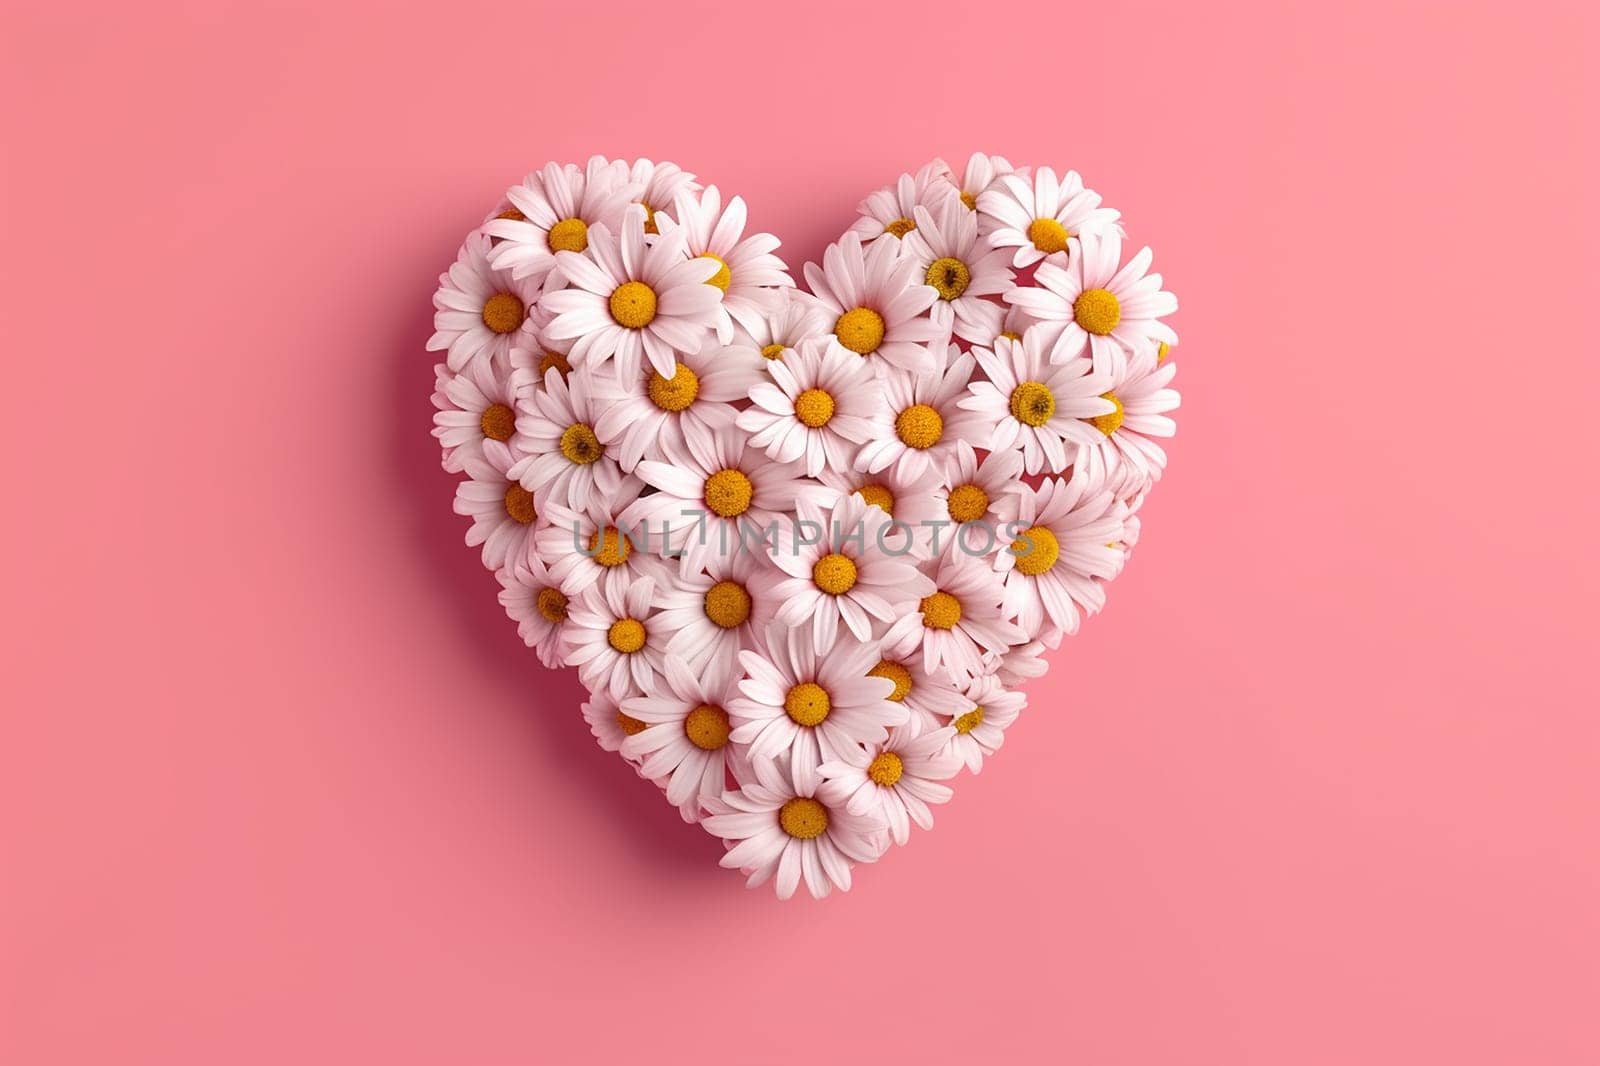 Heart shaped arrangement of daisies on a pink background